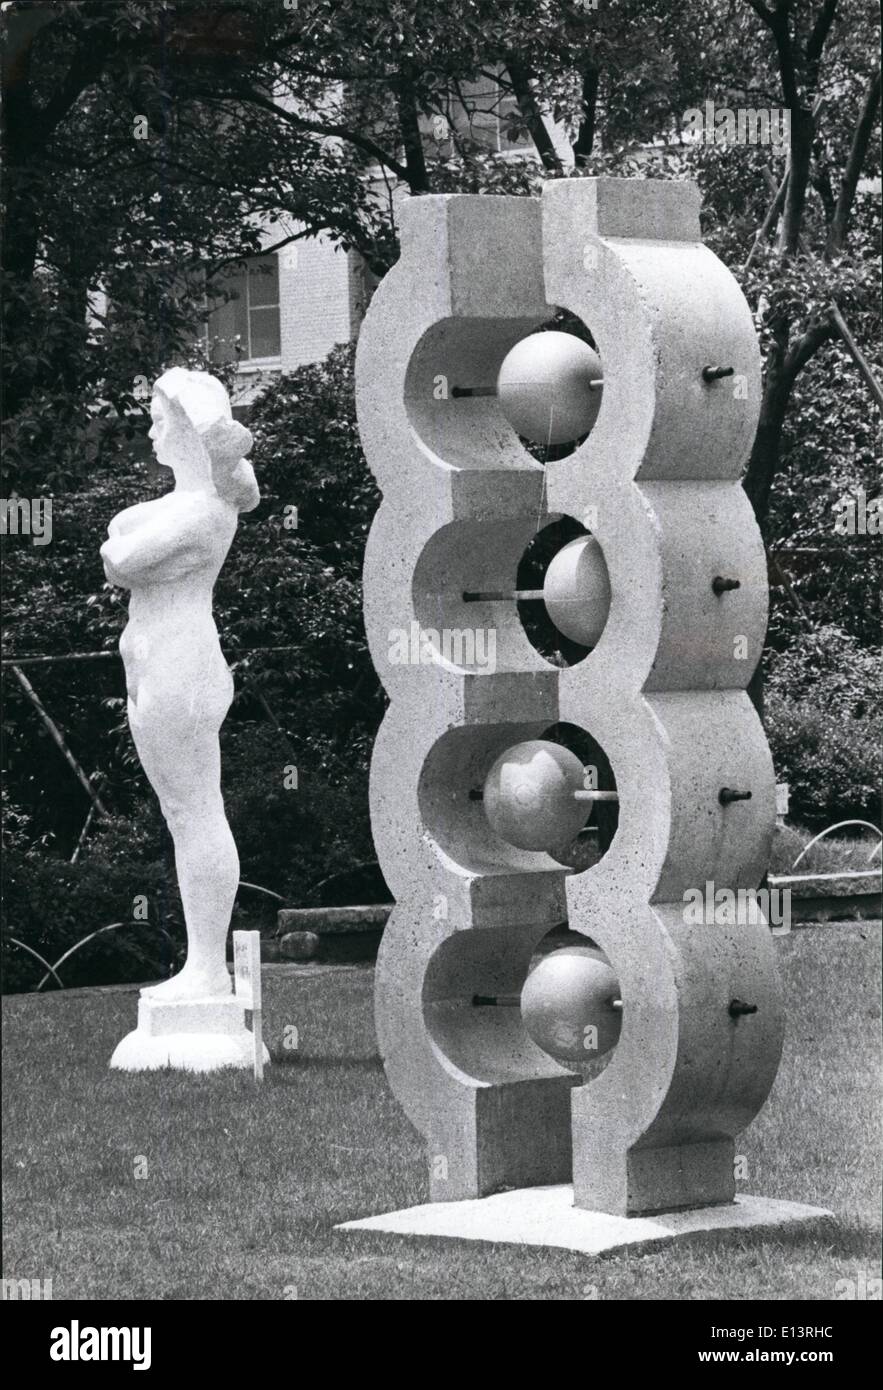 Mar. 27, 2012 - Concrete Art.: Japanese Sculptors are exhibiting their work created from blocks of white cementin Hibiya Park, in the heart of Tokyo this week. Photo Shows Statues of Concrete by apanese Scultors on public view in the Park. Stock Photo